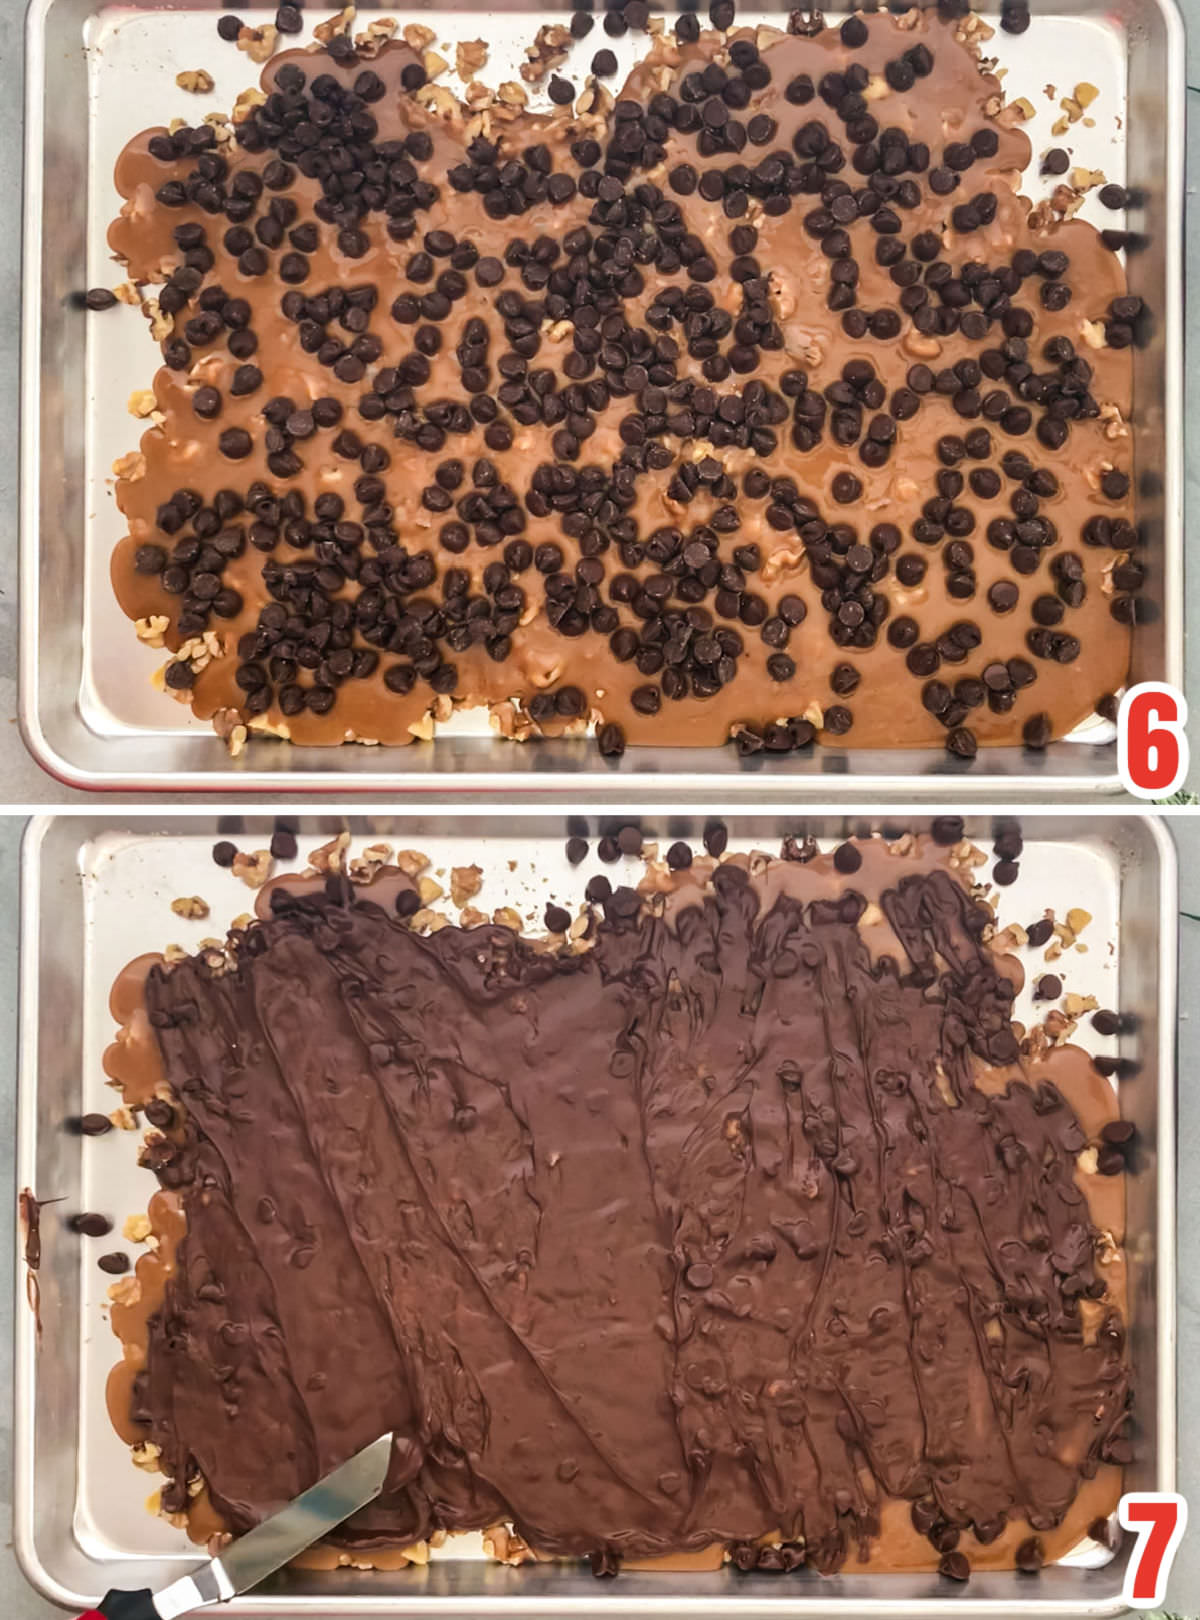 Collage image showing the steps for adding the Chocolate topping to the English Toffee.